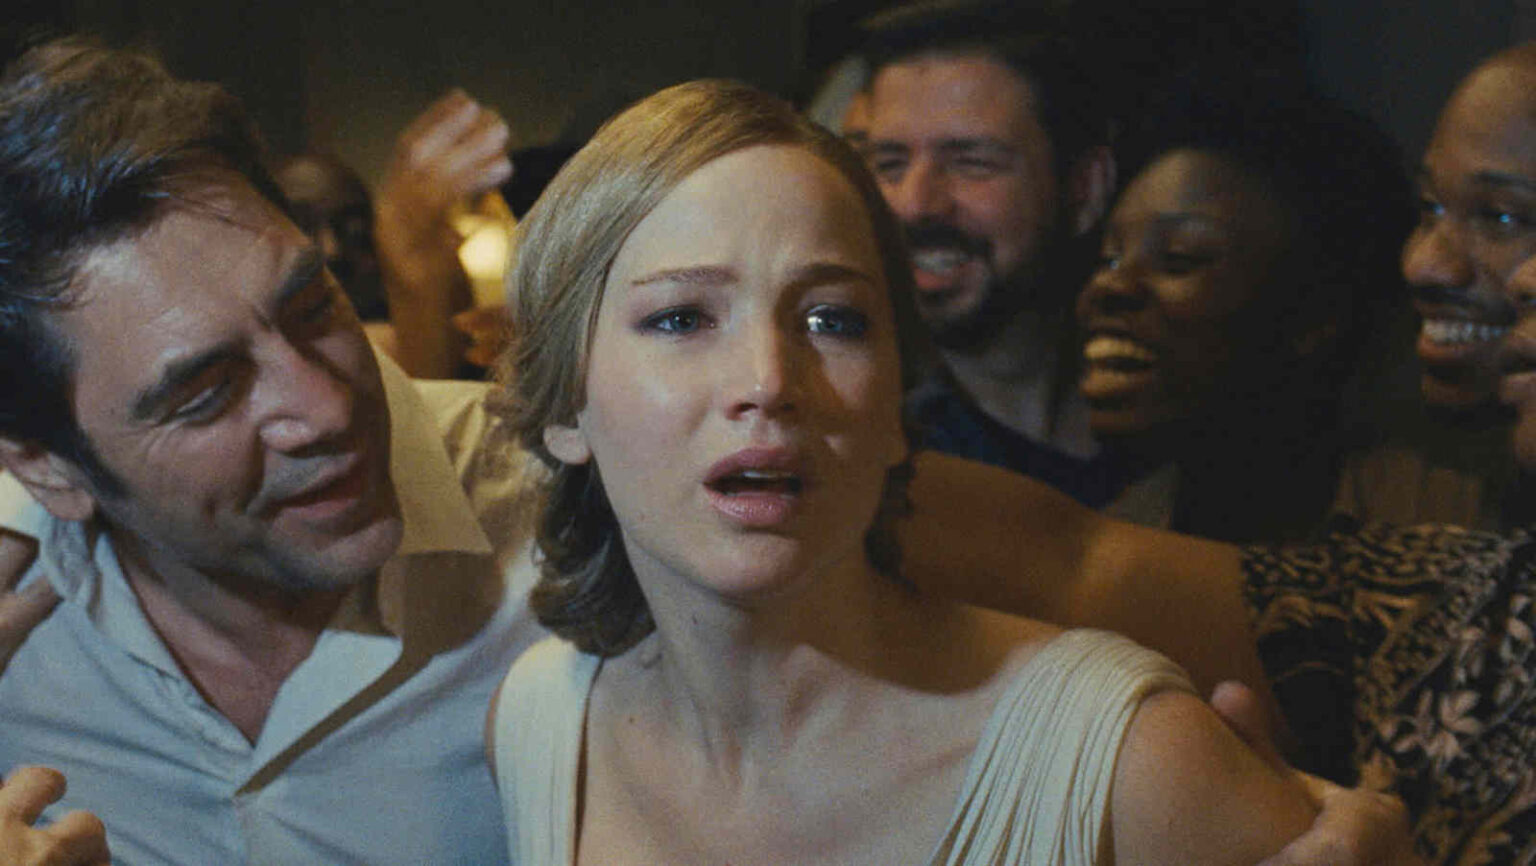 Is Jennifer Lawrence's account of her wedding truly the disaster fit for its own movie? Let's find out.